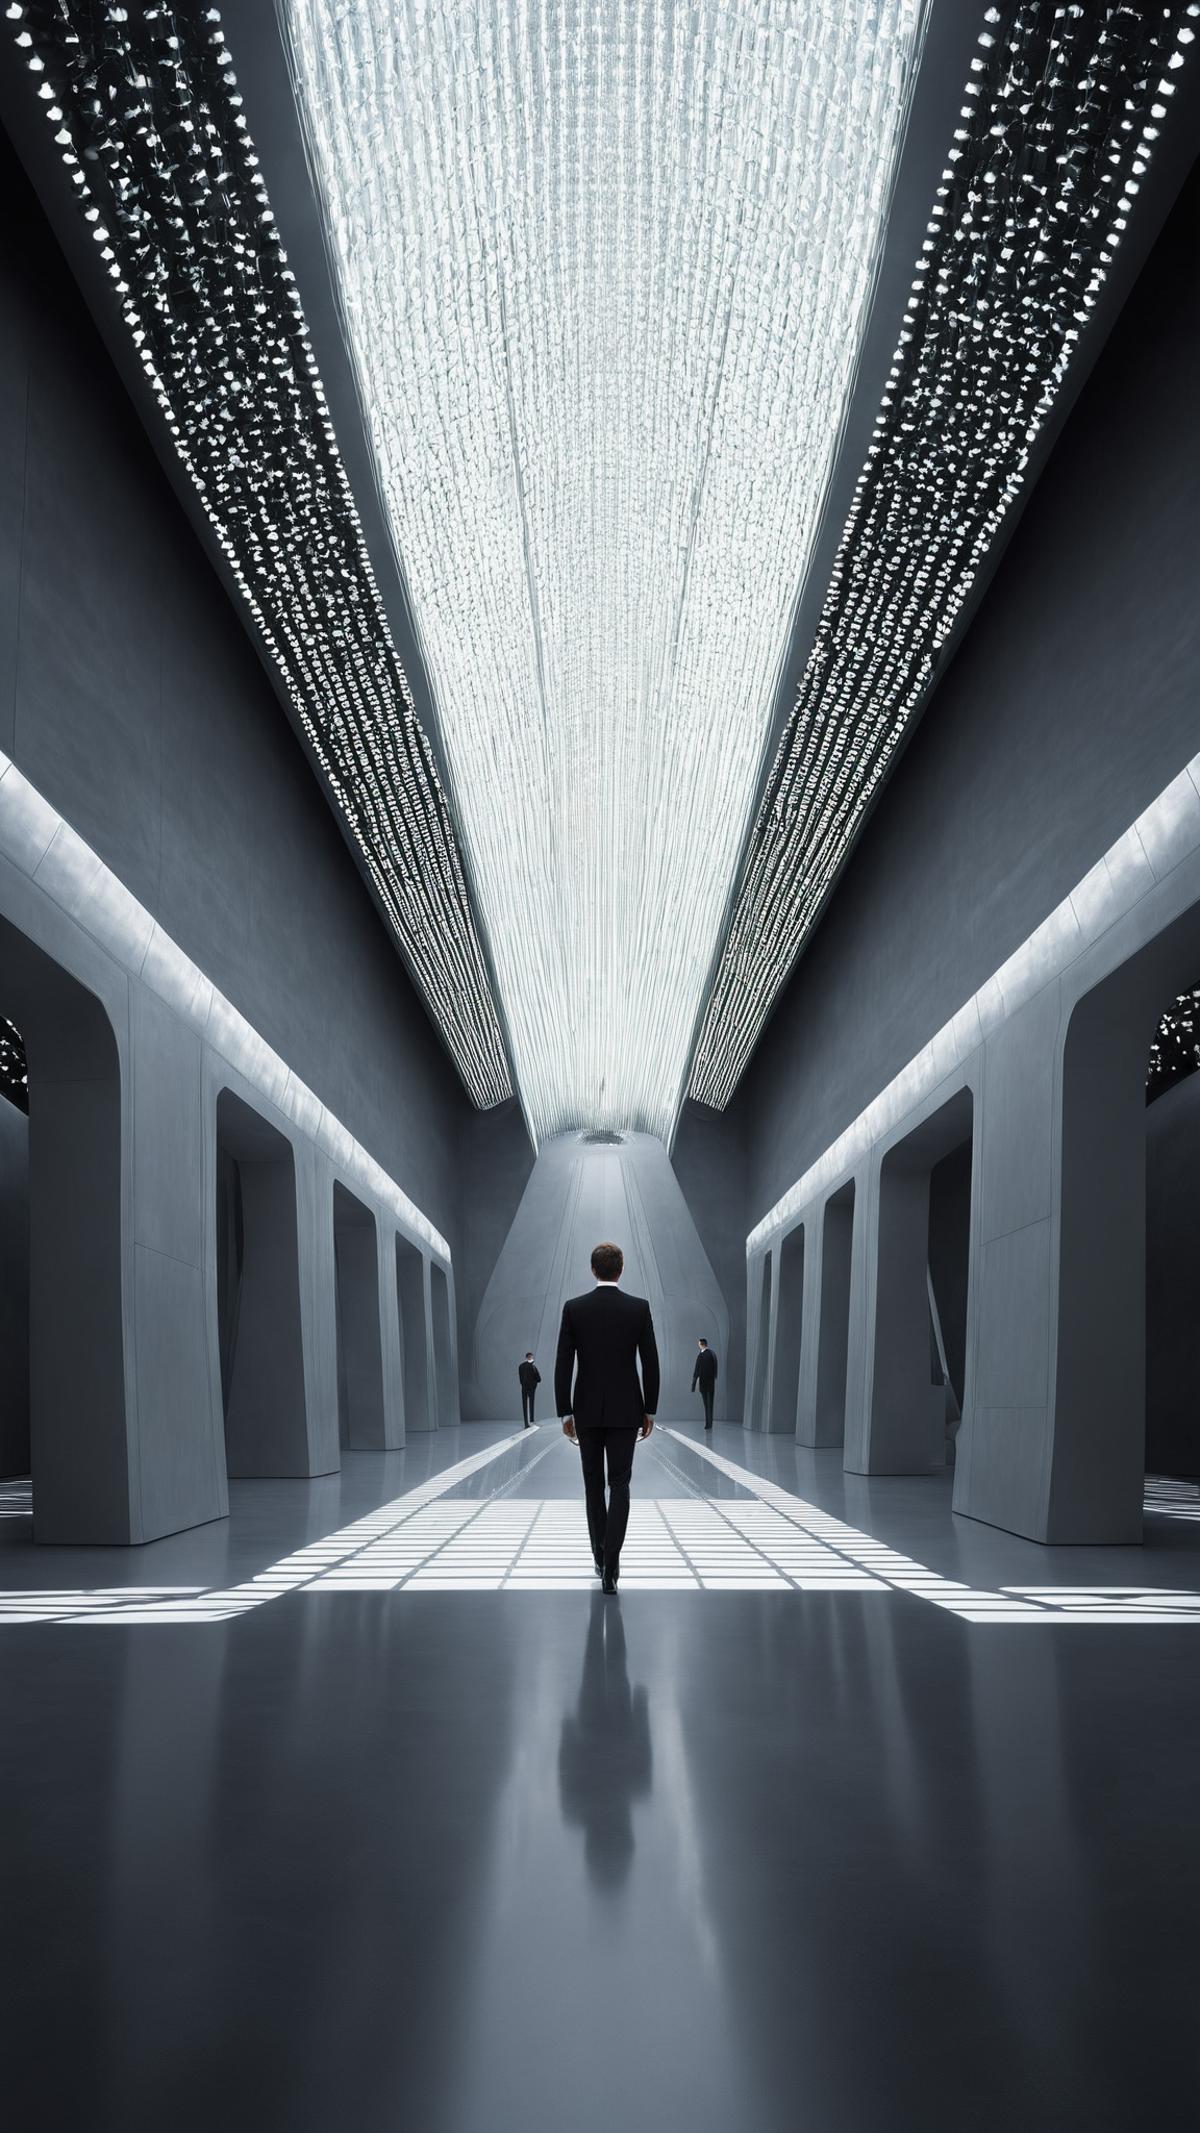 A man walking down an empty hallway with lights above.